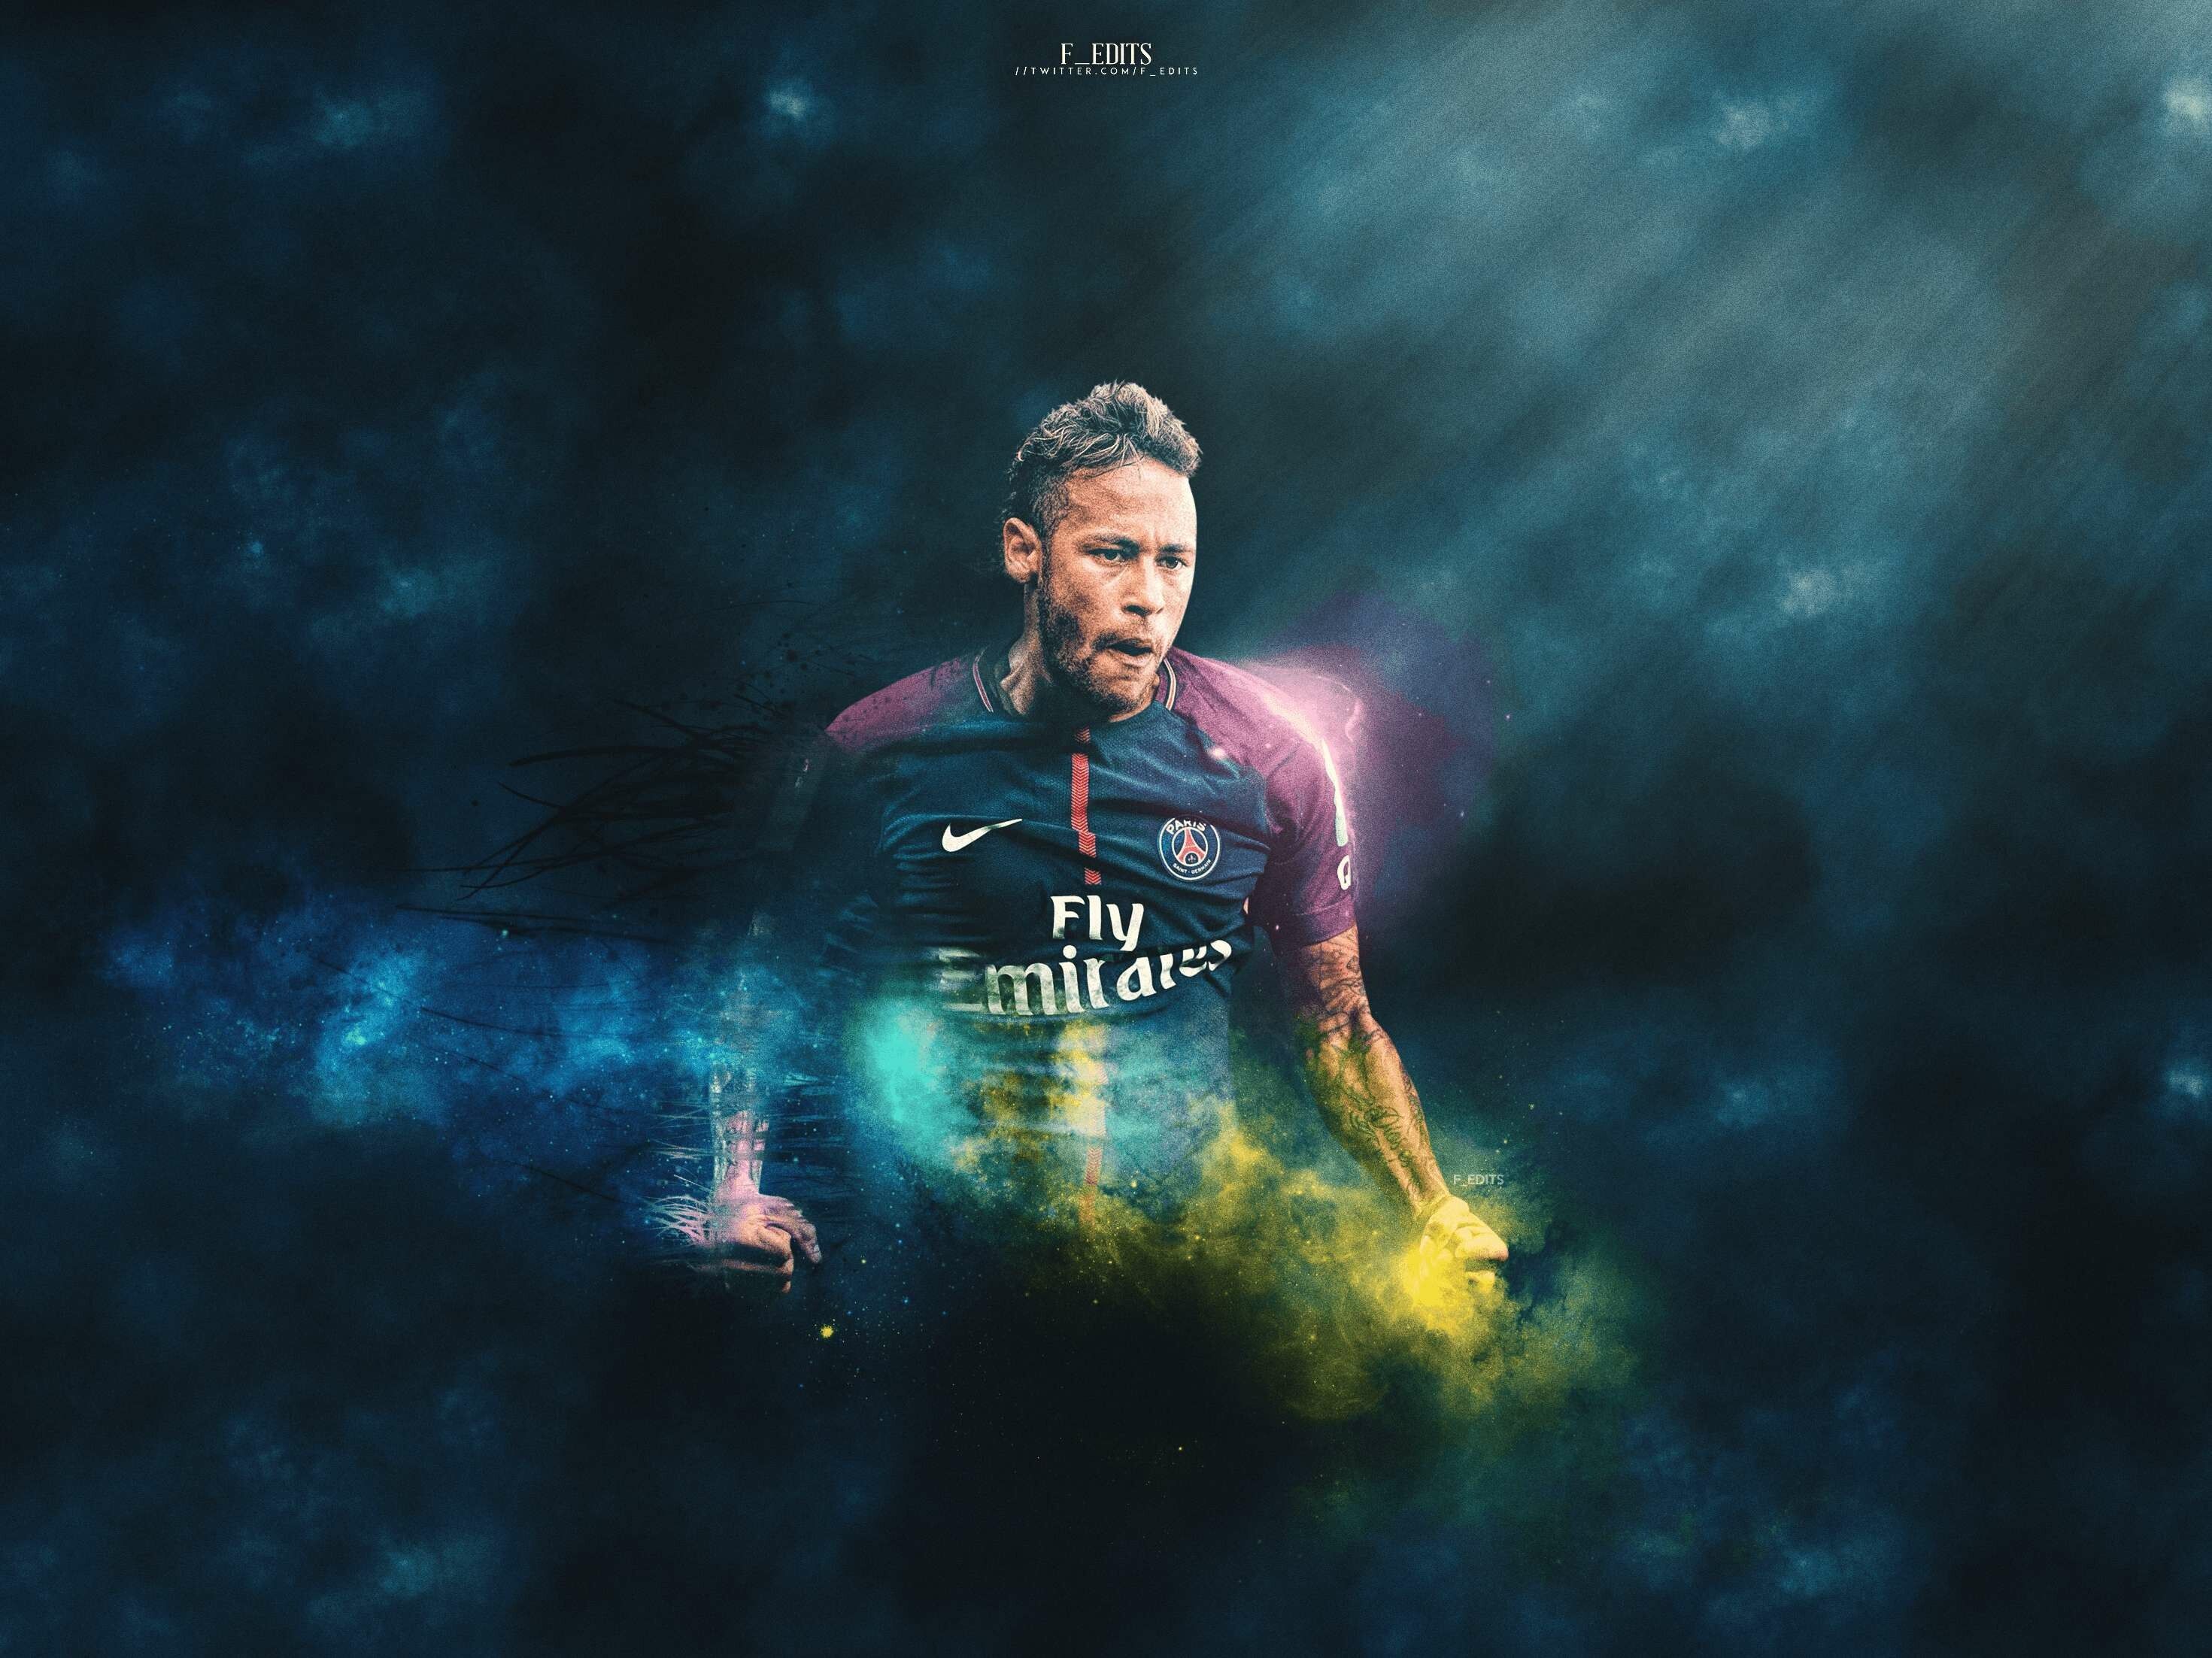 Neymar Wallpaper: HD, 4K, 5K for PC and Mobile. Download free image for iPhone, Android